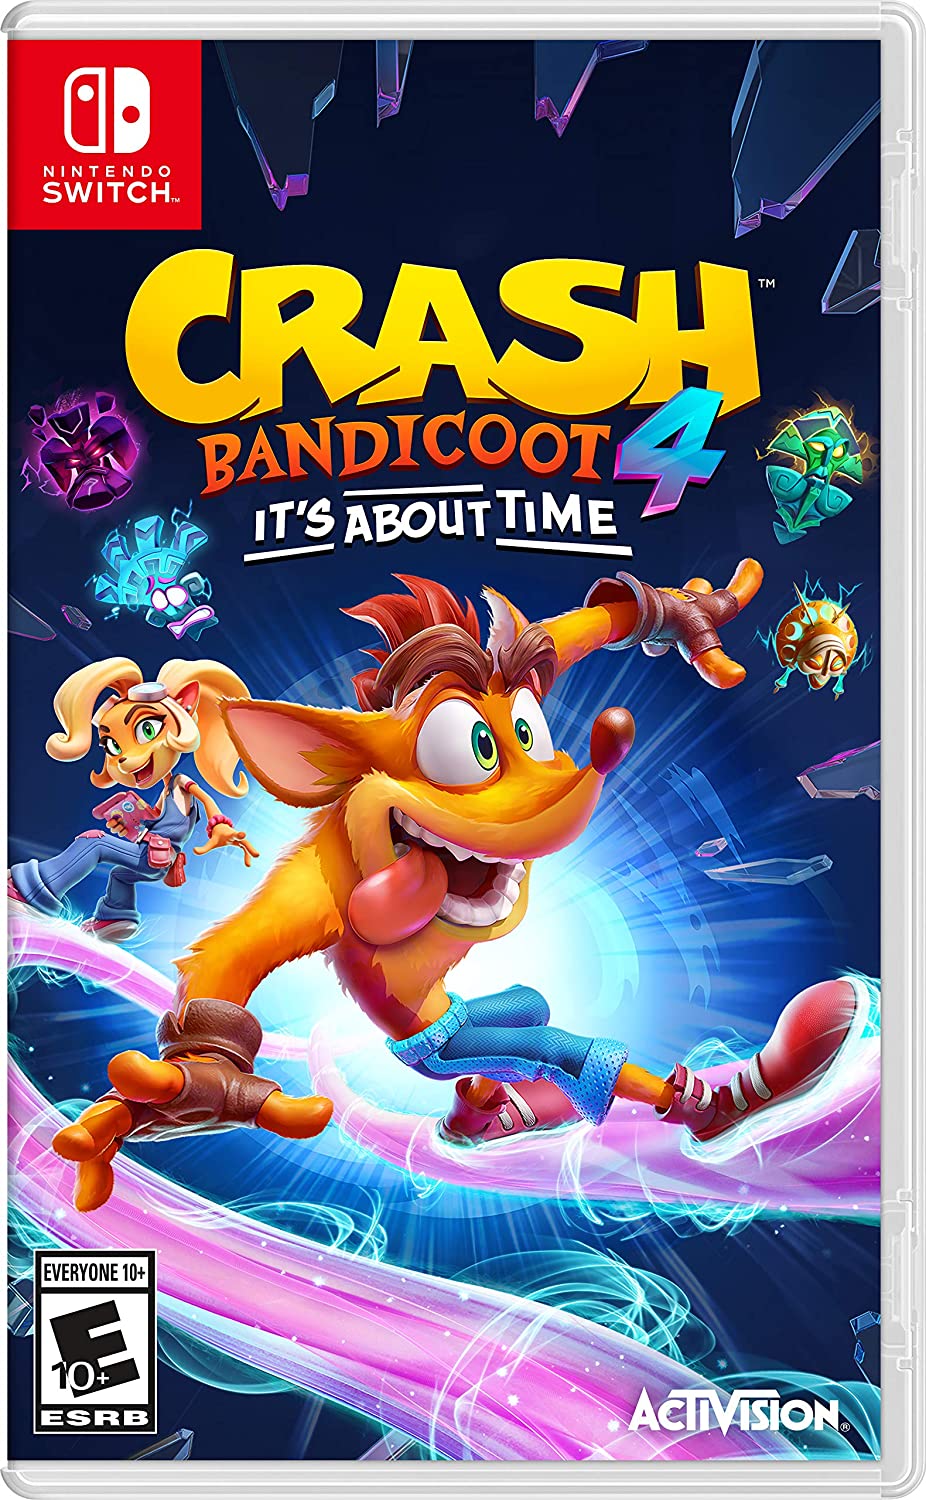 Crash Bandicoot 4: It's About Time game cover artwork.